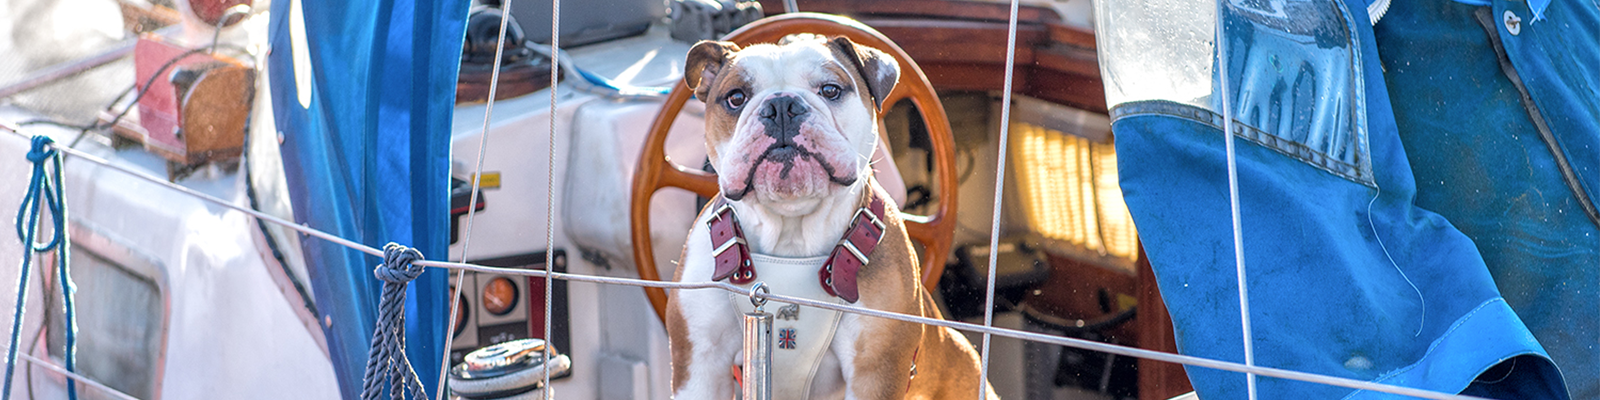 Boating with Four-Legged Friends – How to Avoid Ruff Seas While Traveling